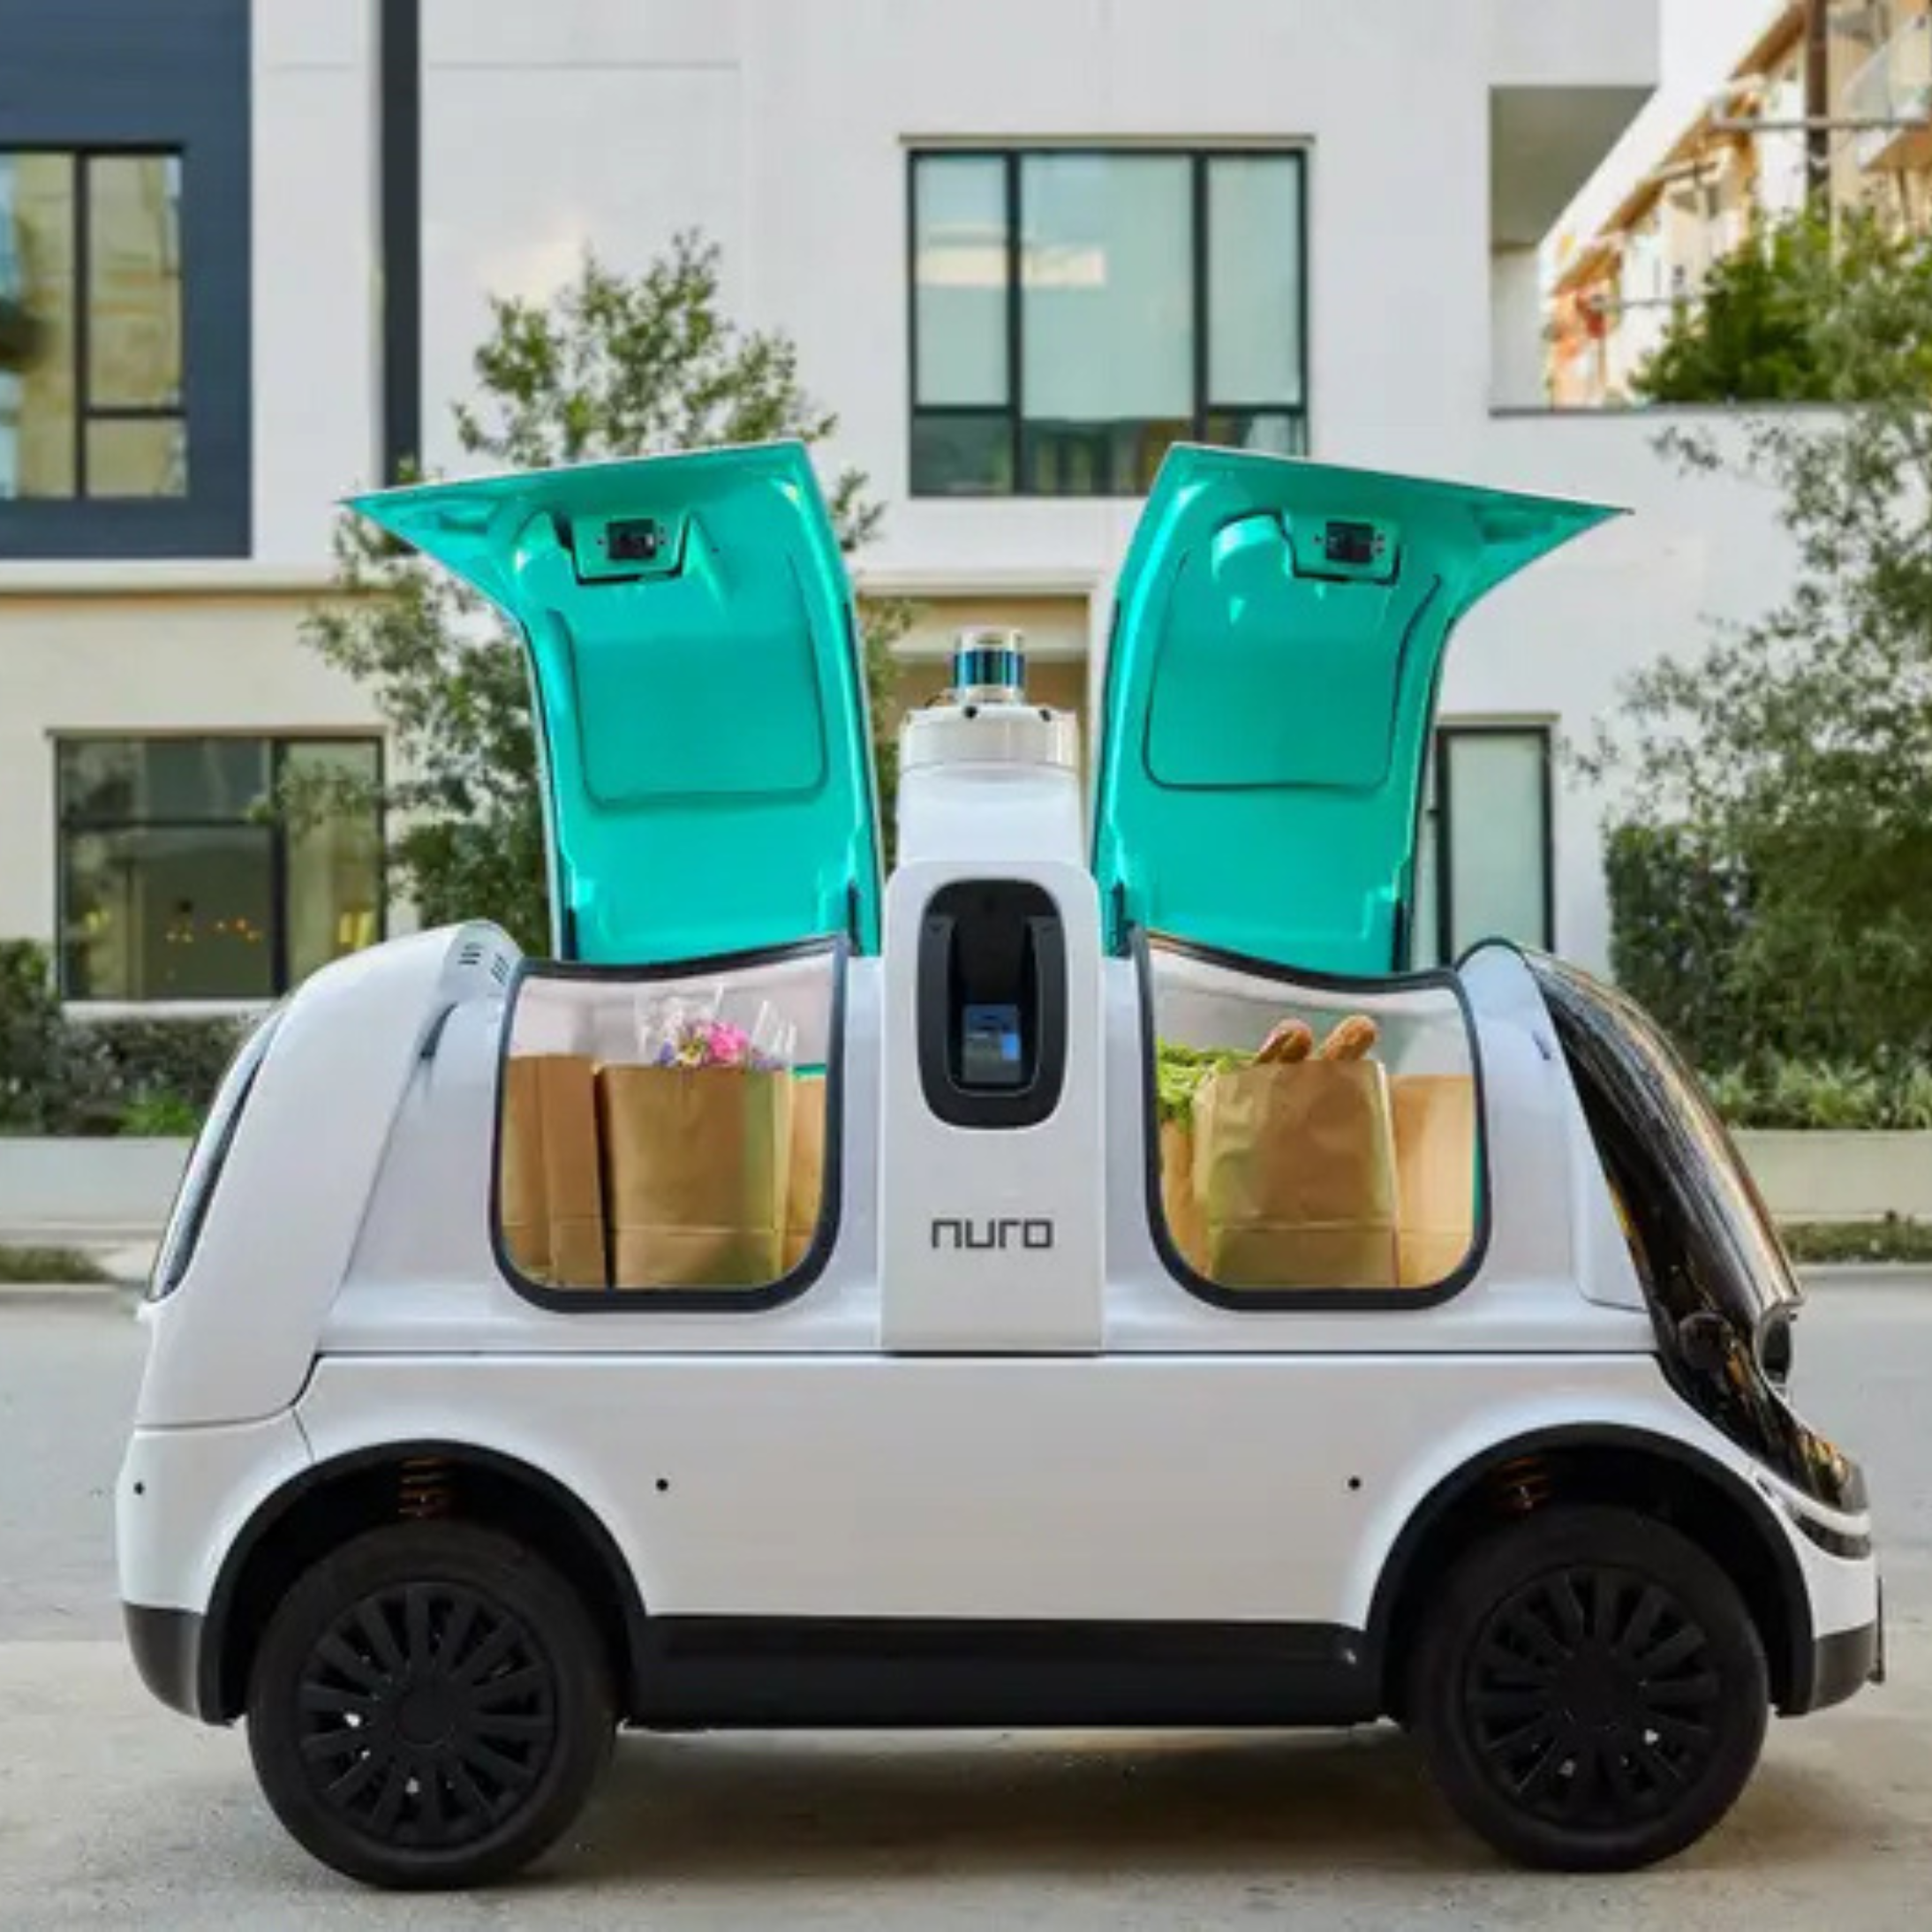 Futuristic food delivery vehicle